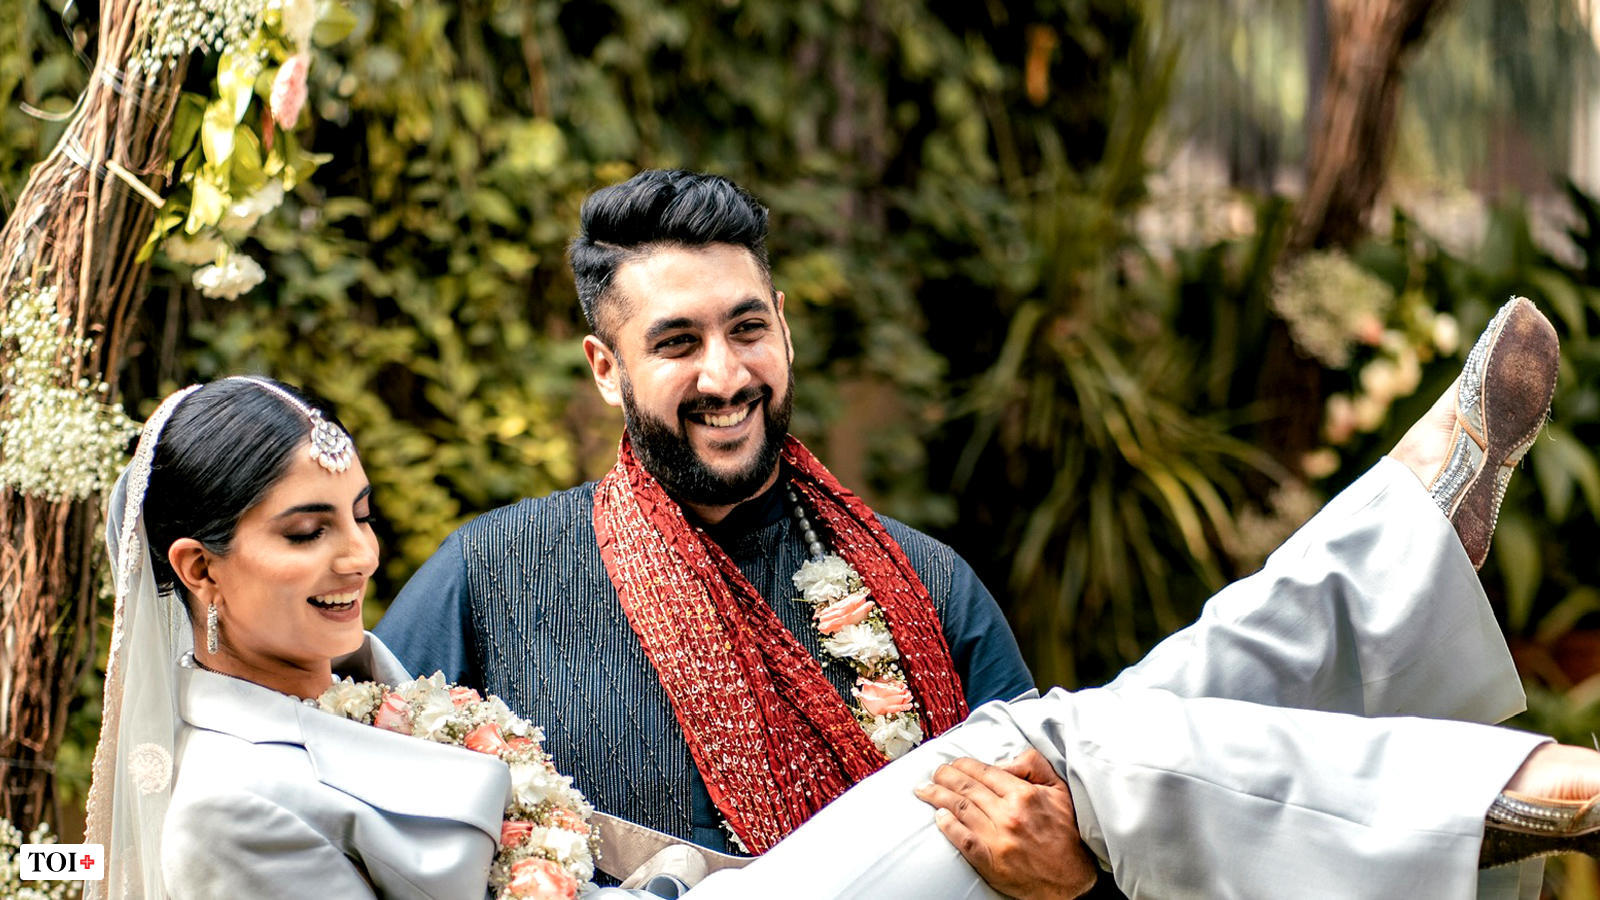 When bride brings baraat and tattoos replace sindoor | India News - Times  of India